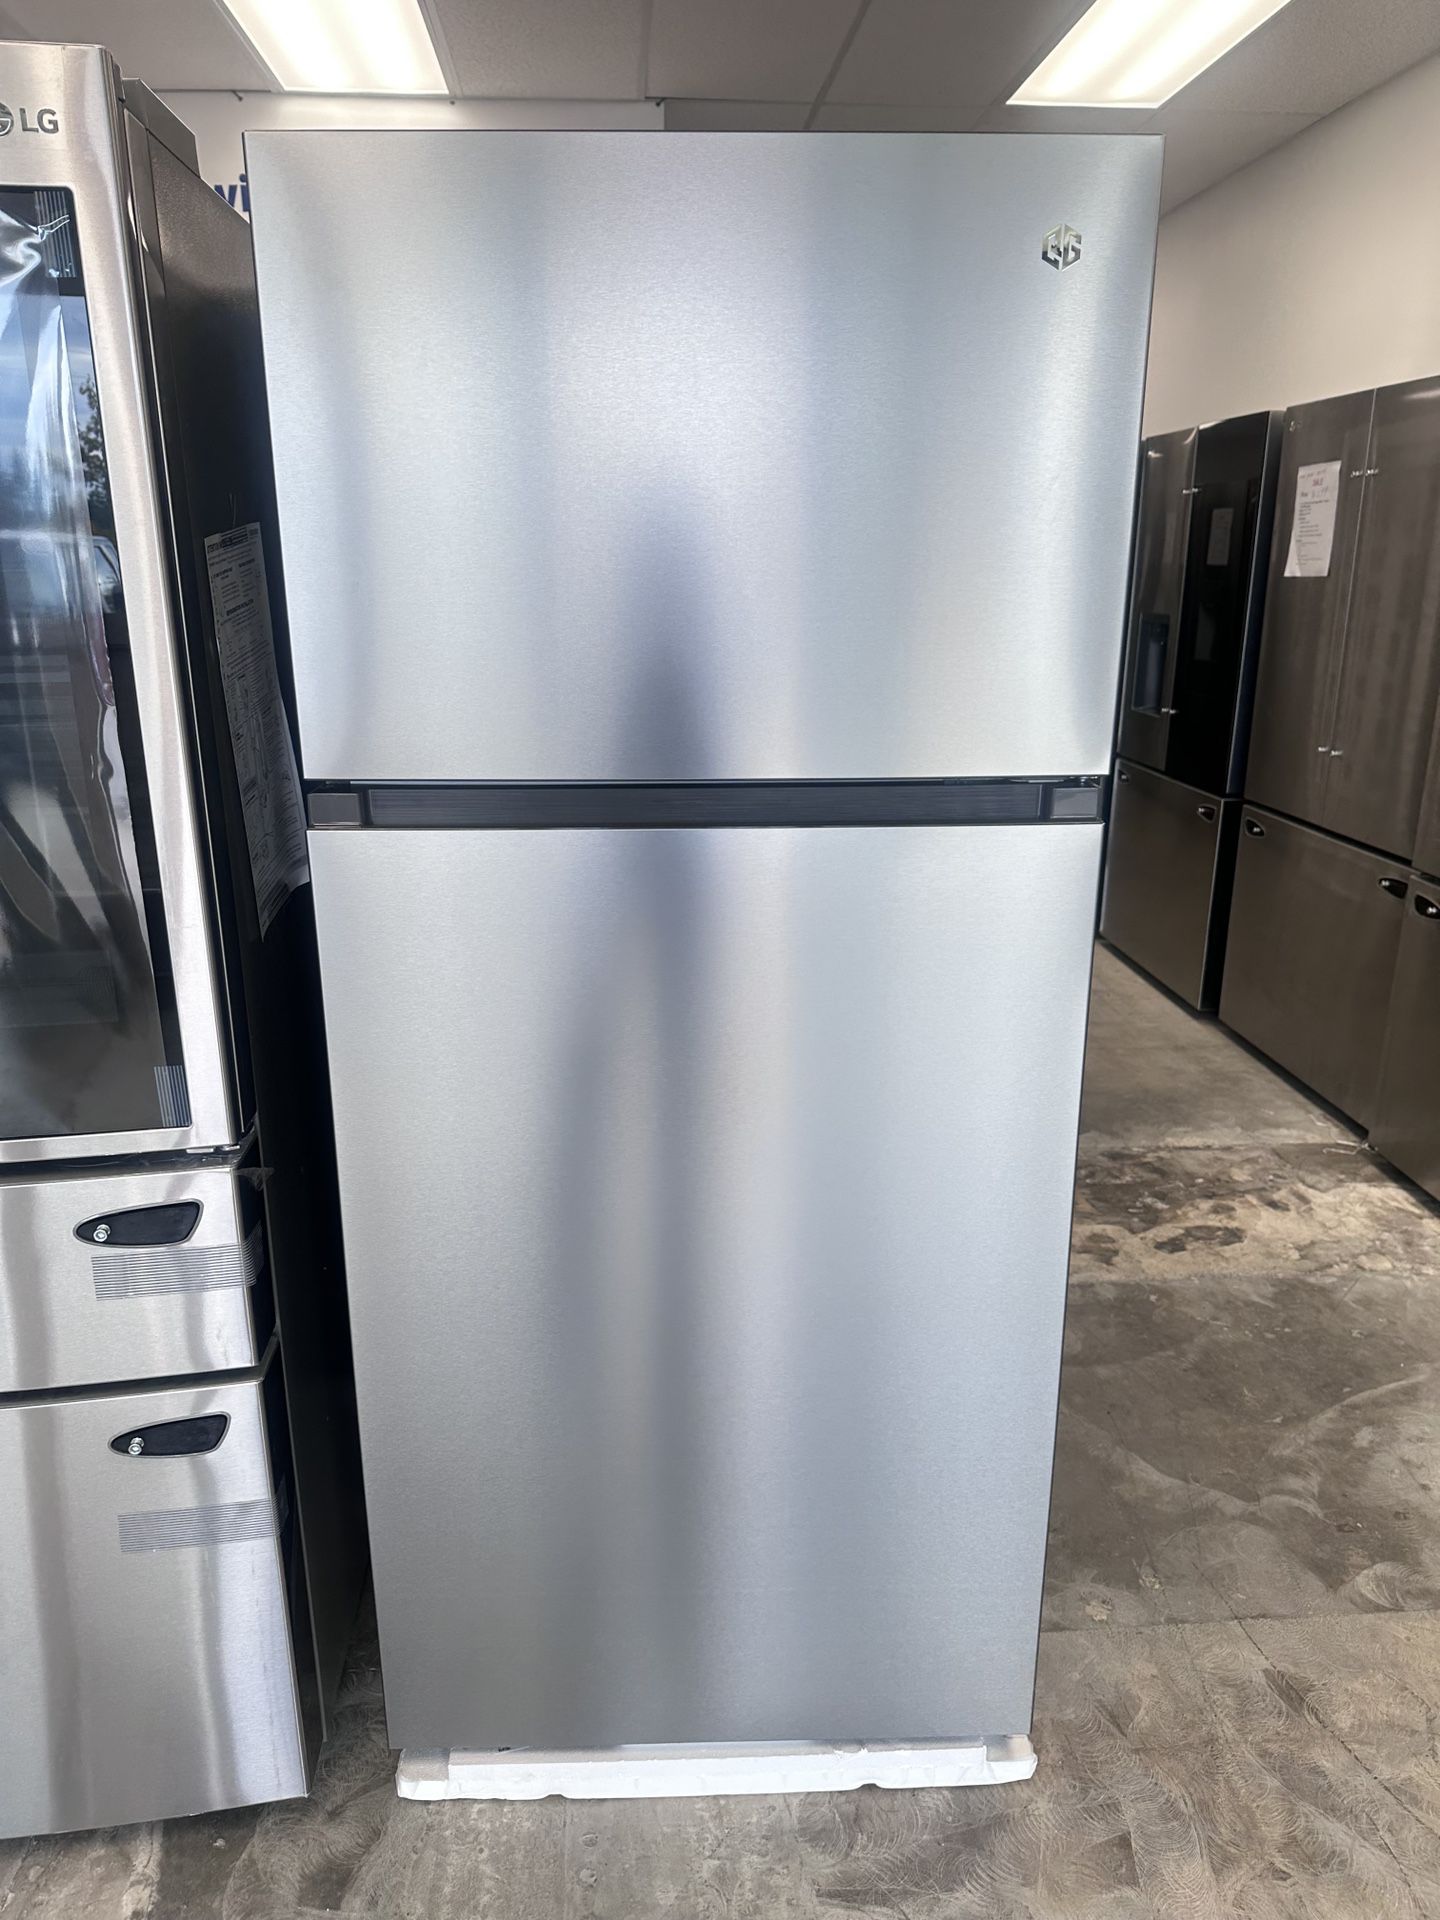 30” Wide Top Freezer New In Box 